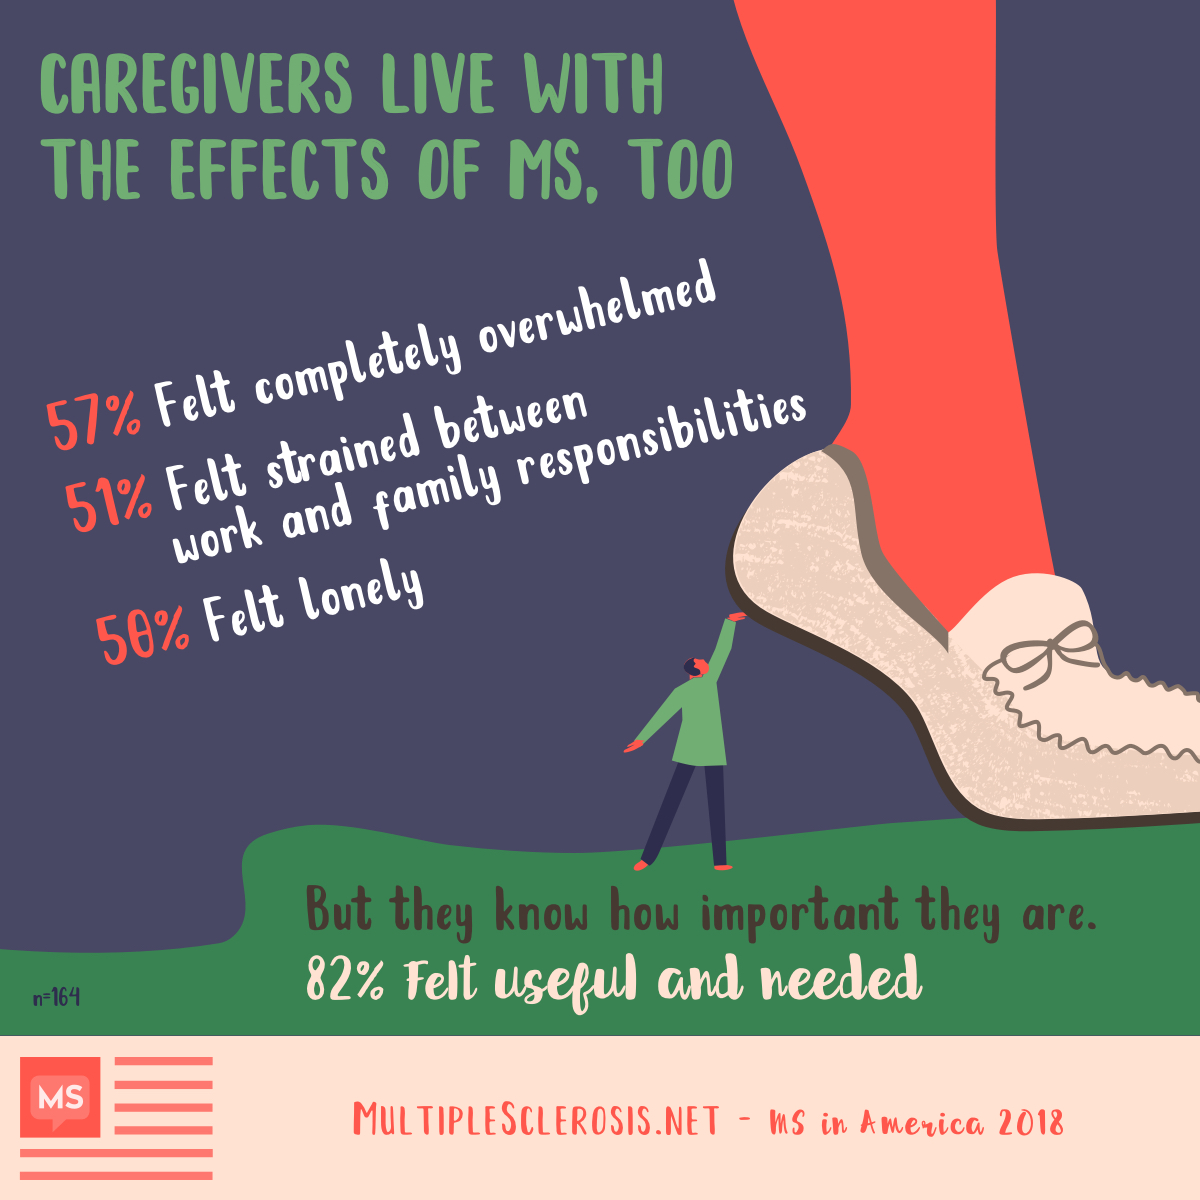 Caregivers live with the effects of MS, too. 57% Felt completely overwhelmed, 51% felt strained between work and family responsibilities, 50% felt lonely. But they also know how important they are; 82% Felt useful and needed